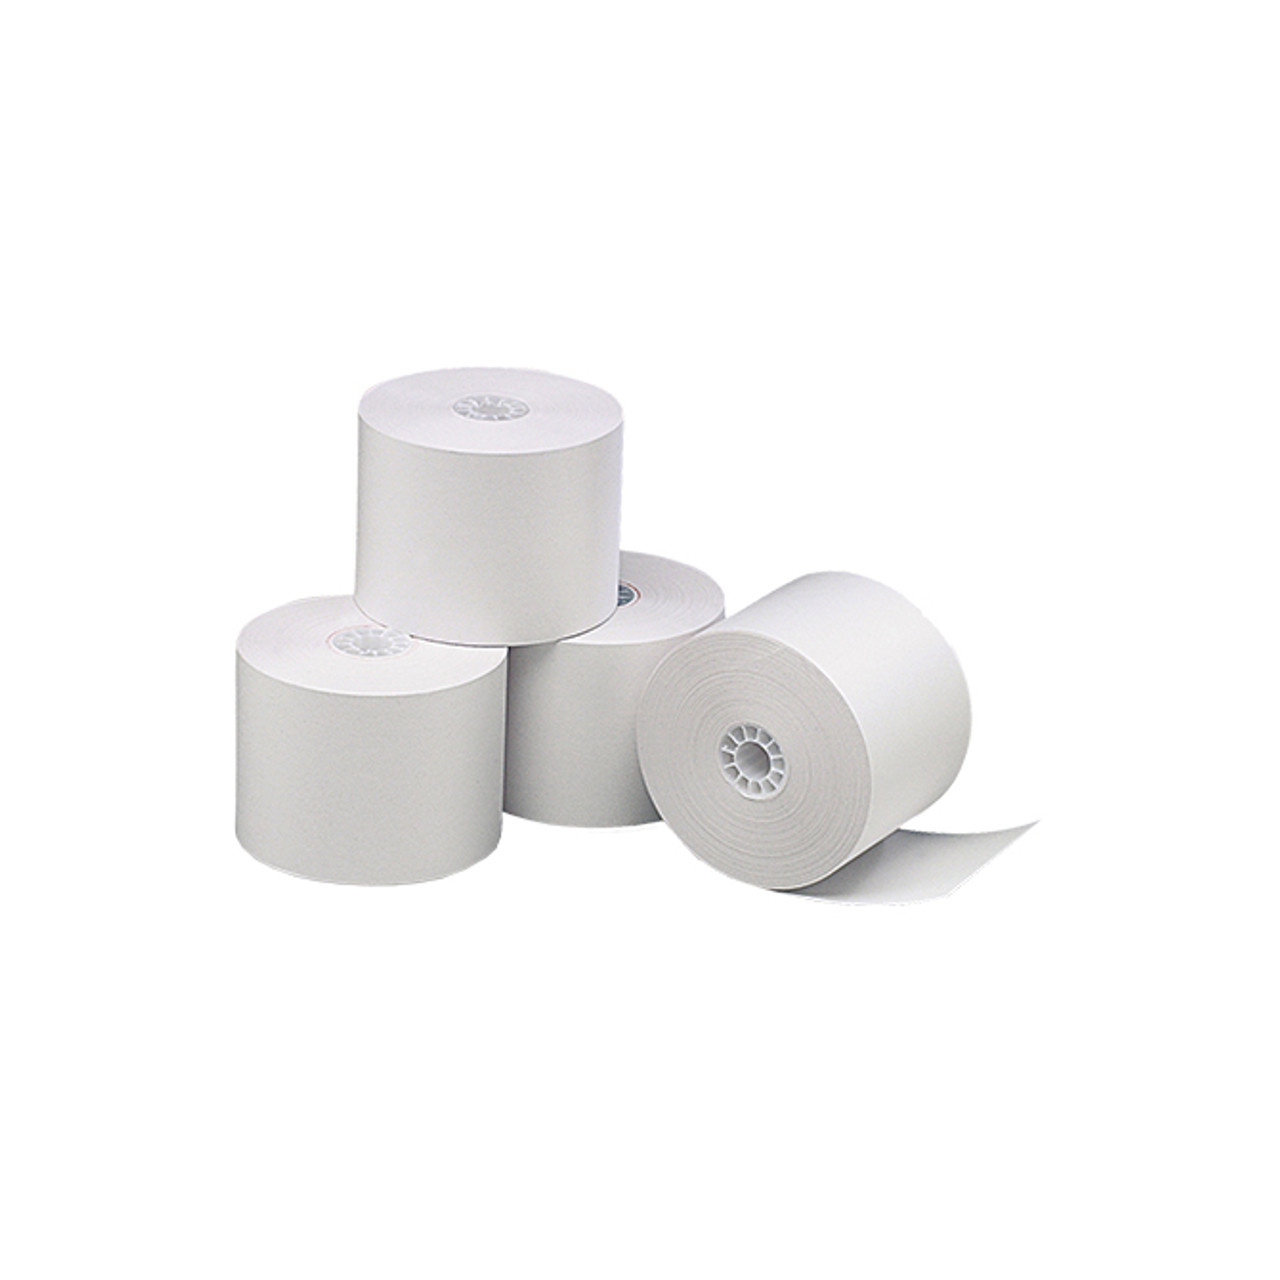 Paper Roll - Direct Thermal - 2-1/4" x 85' - Qty. 3